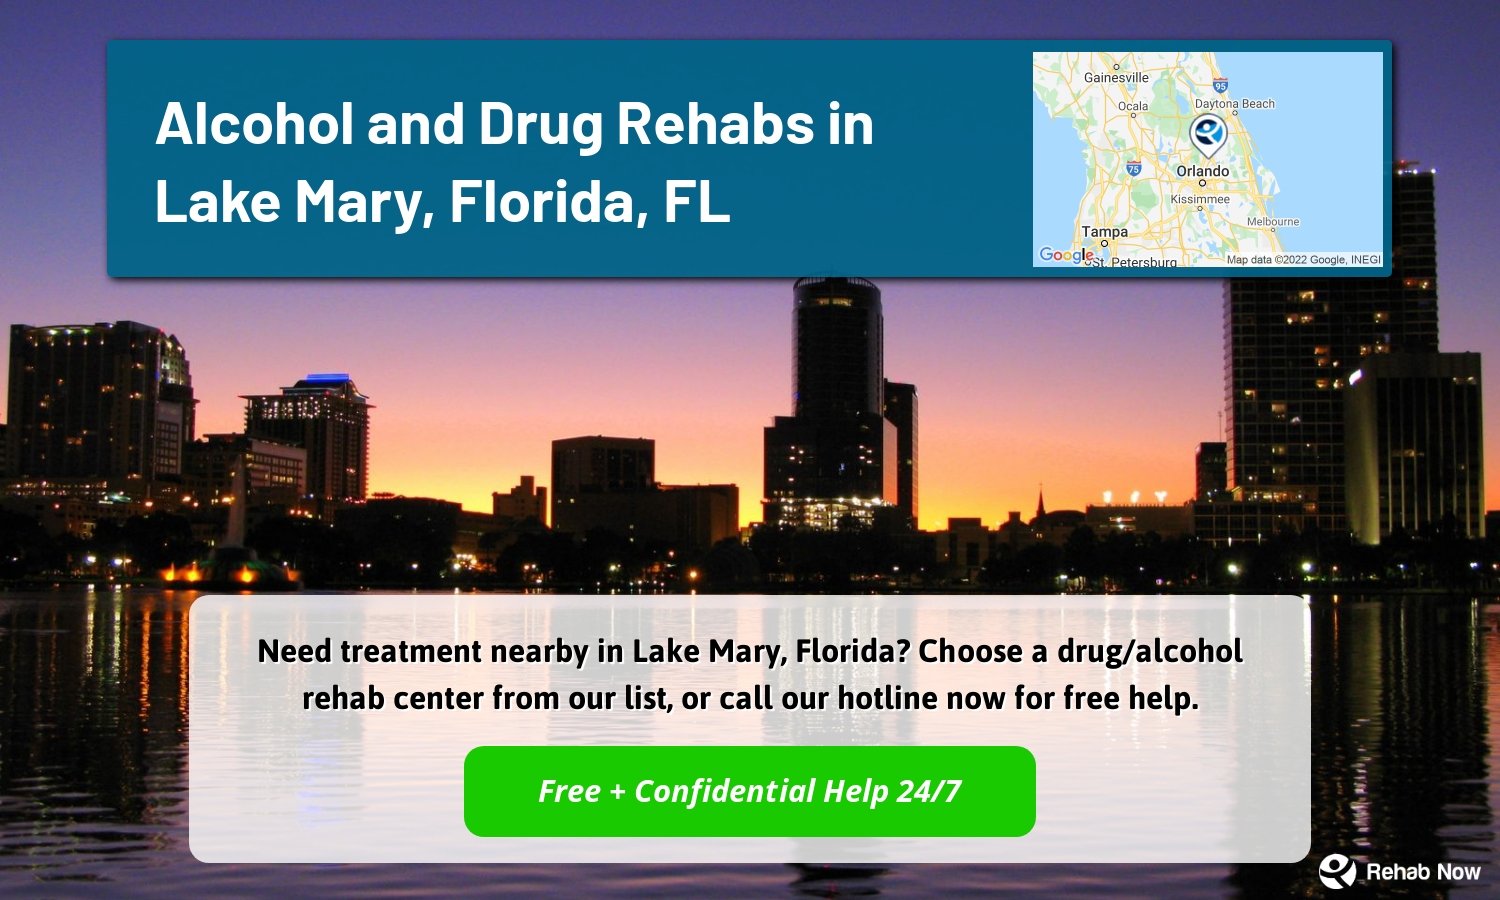 Need treatment nearby in Lake Mary, Florida? Choose a drug/alcohol rehab center from our list, or call our hotline now for free help.